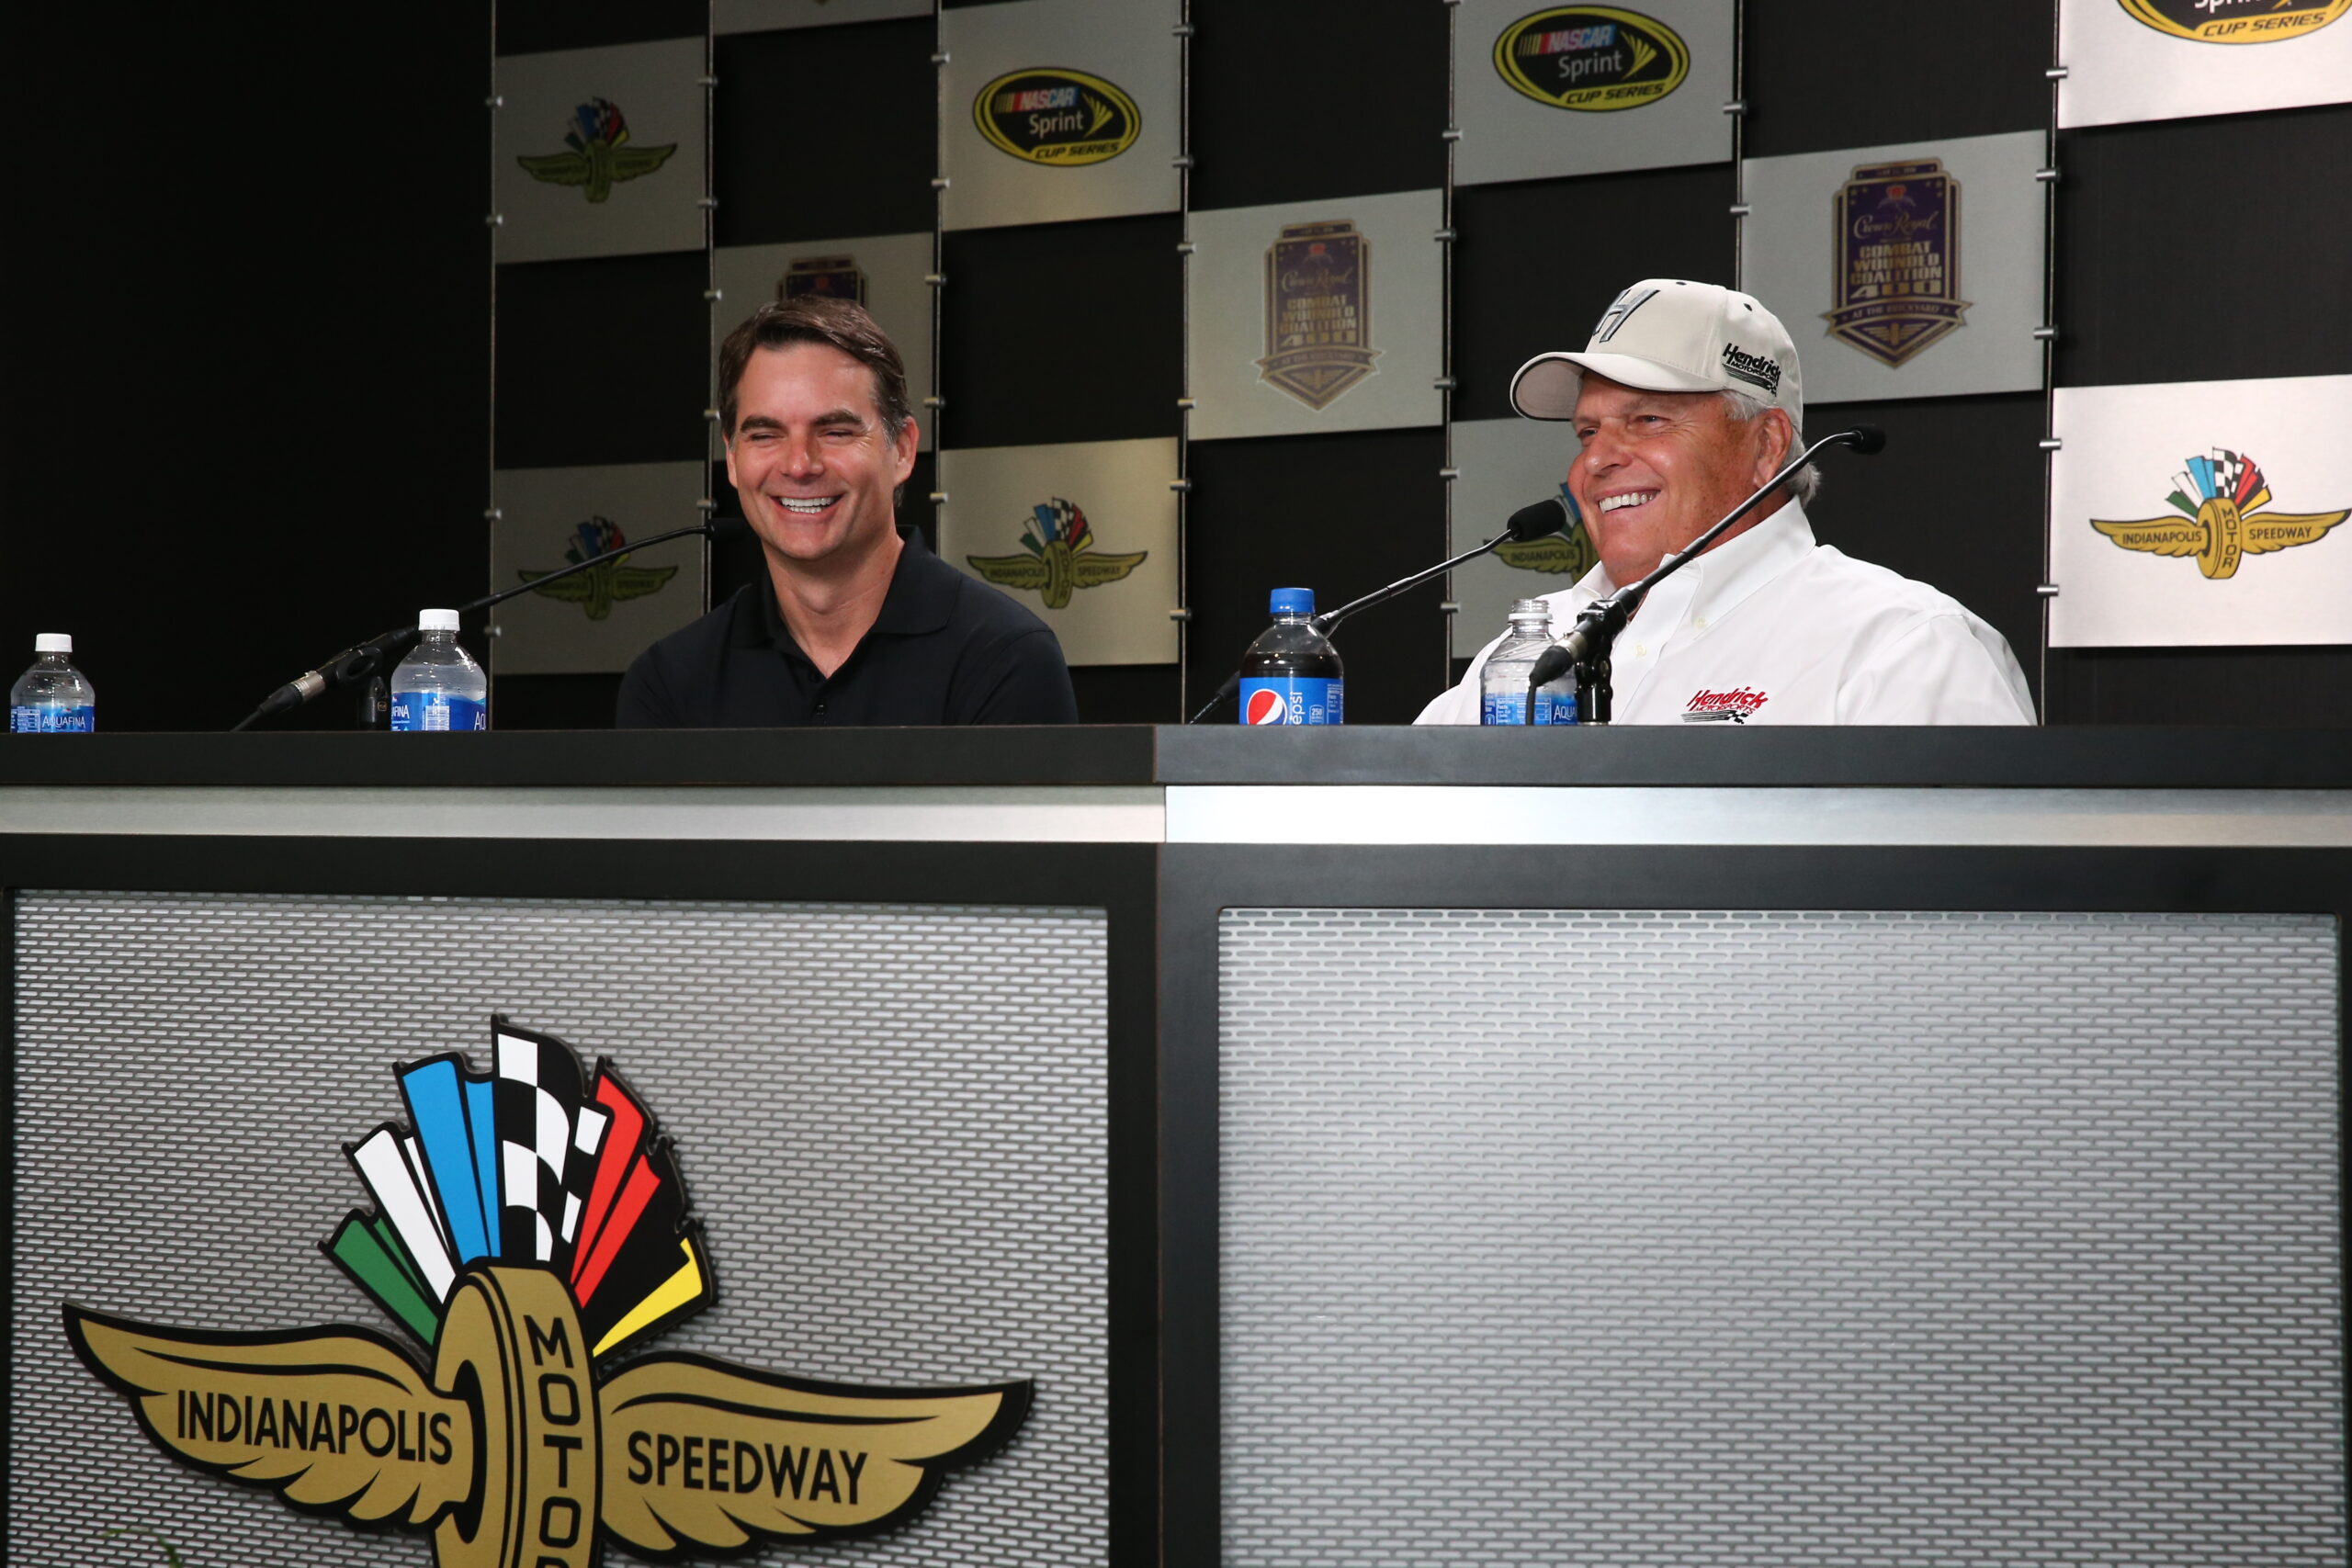 "I’m pretty sure it wouldn’t have turned out quite the way that it did with Rick Hendrick and Hendrick Motorsports." - Jeff Gordon (Photo: Bret Kelley)